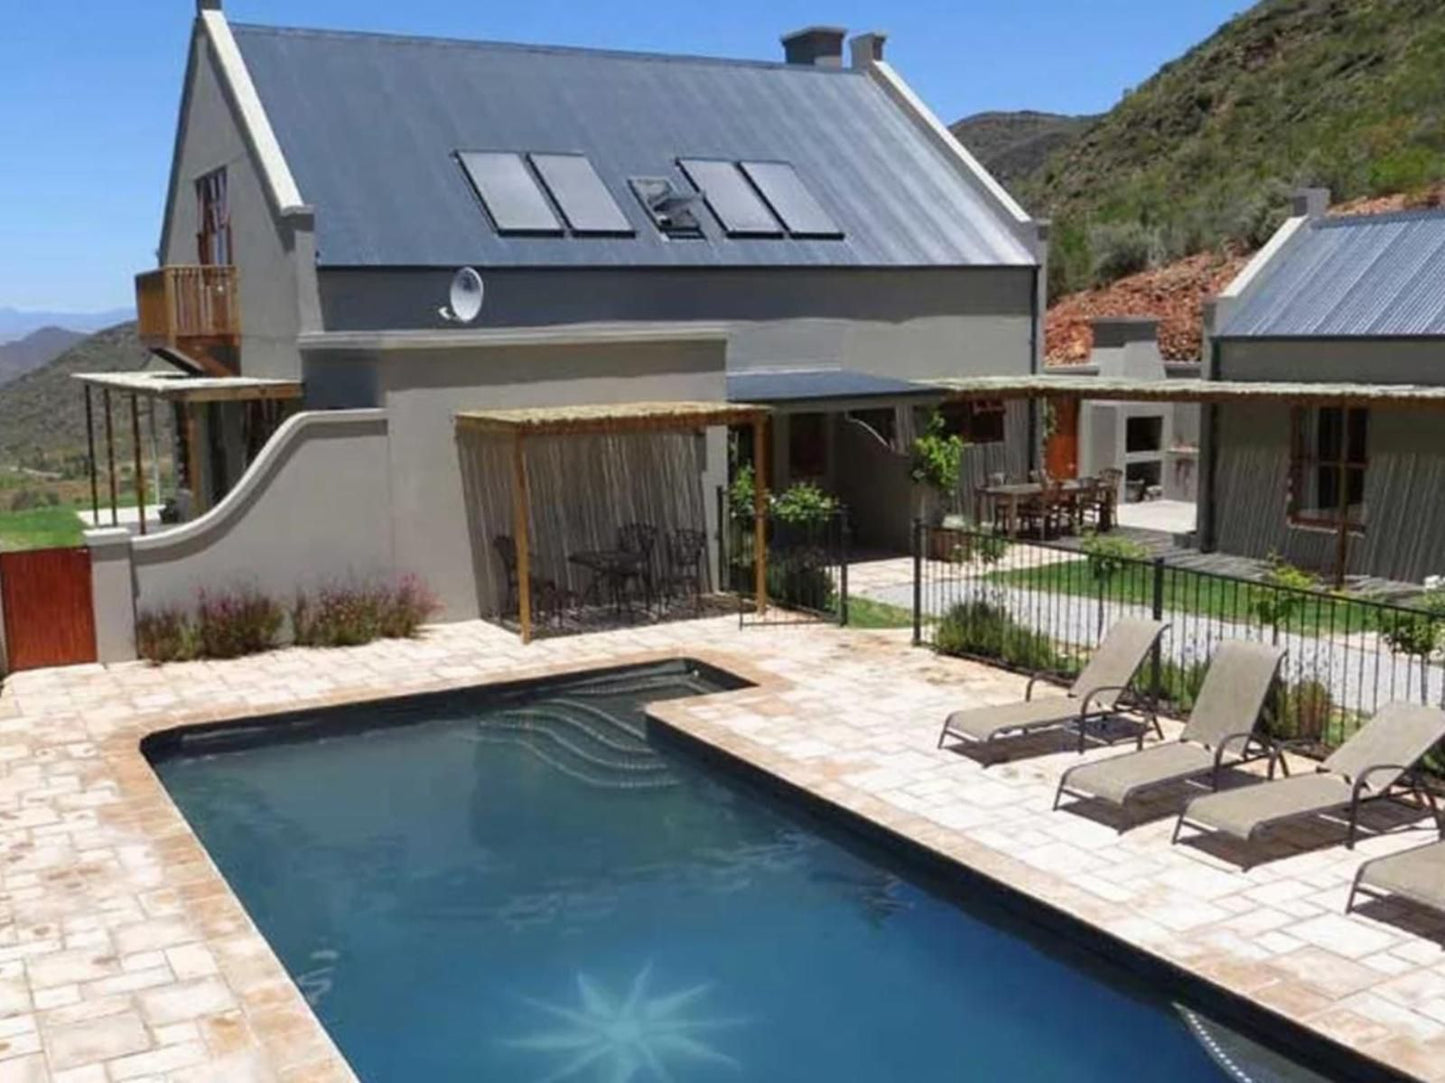 Tierhoek Cottages Robertson Western Cape South Africa House, Building, Architecture, Swimming Pool